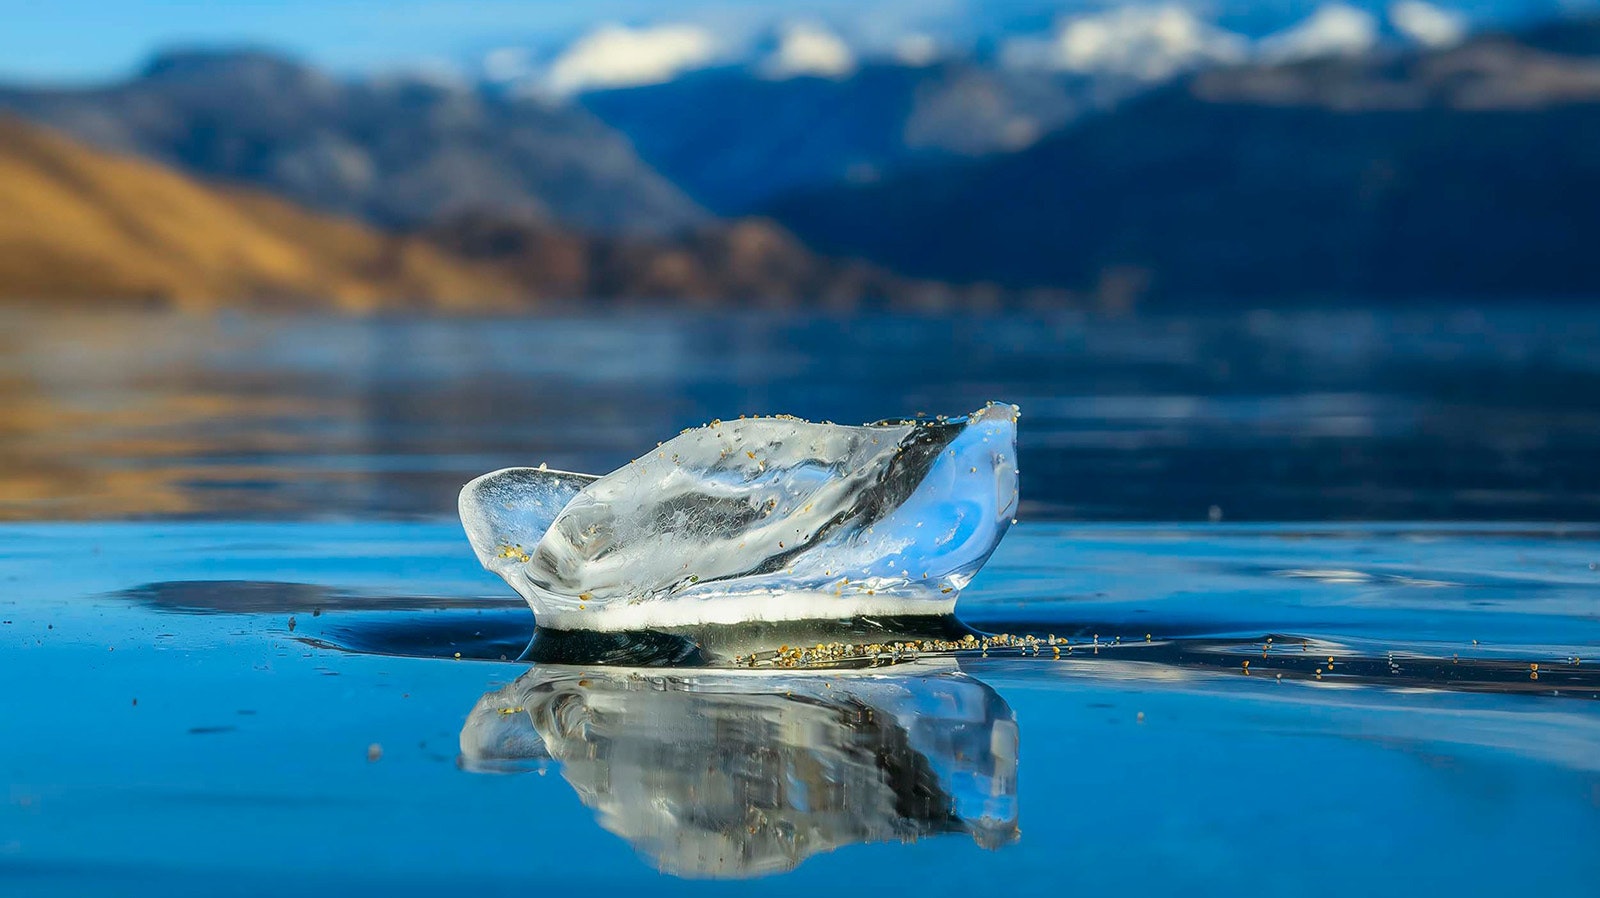 The ice on Fremont Lake was so clear and pure, a piece of it floating in the water looks like a splash.